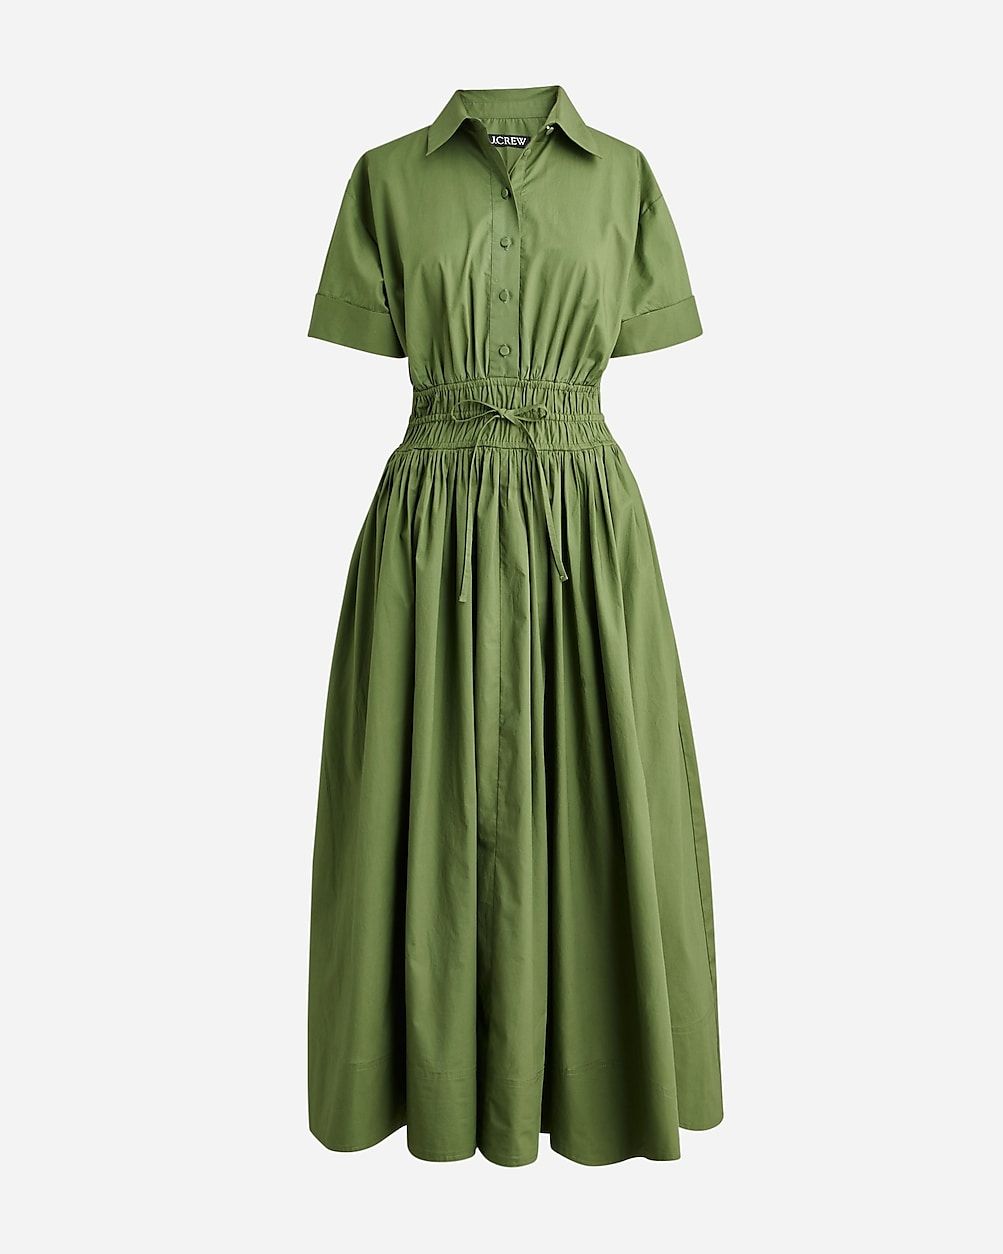 How to wear itbest seller4.6(152 REVIEWS)Elena shirtdress in cotton poplin$168.00Select Colors$10... | J.Crew US